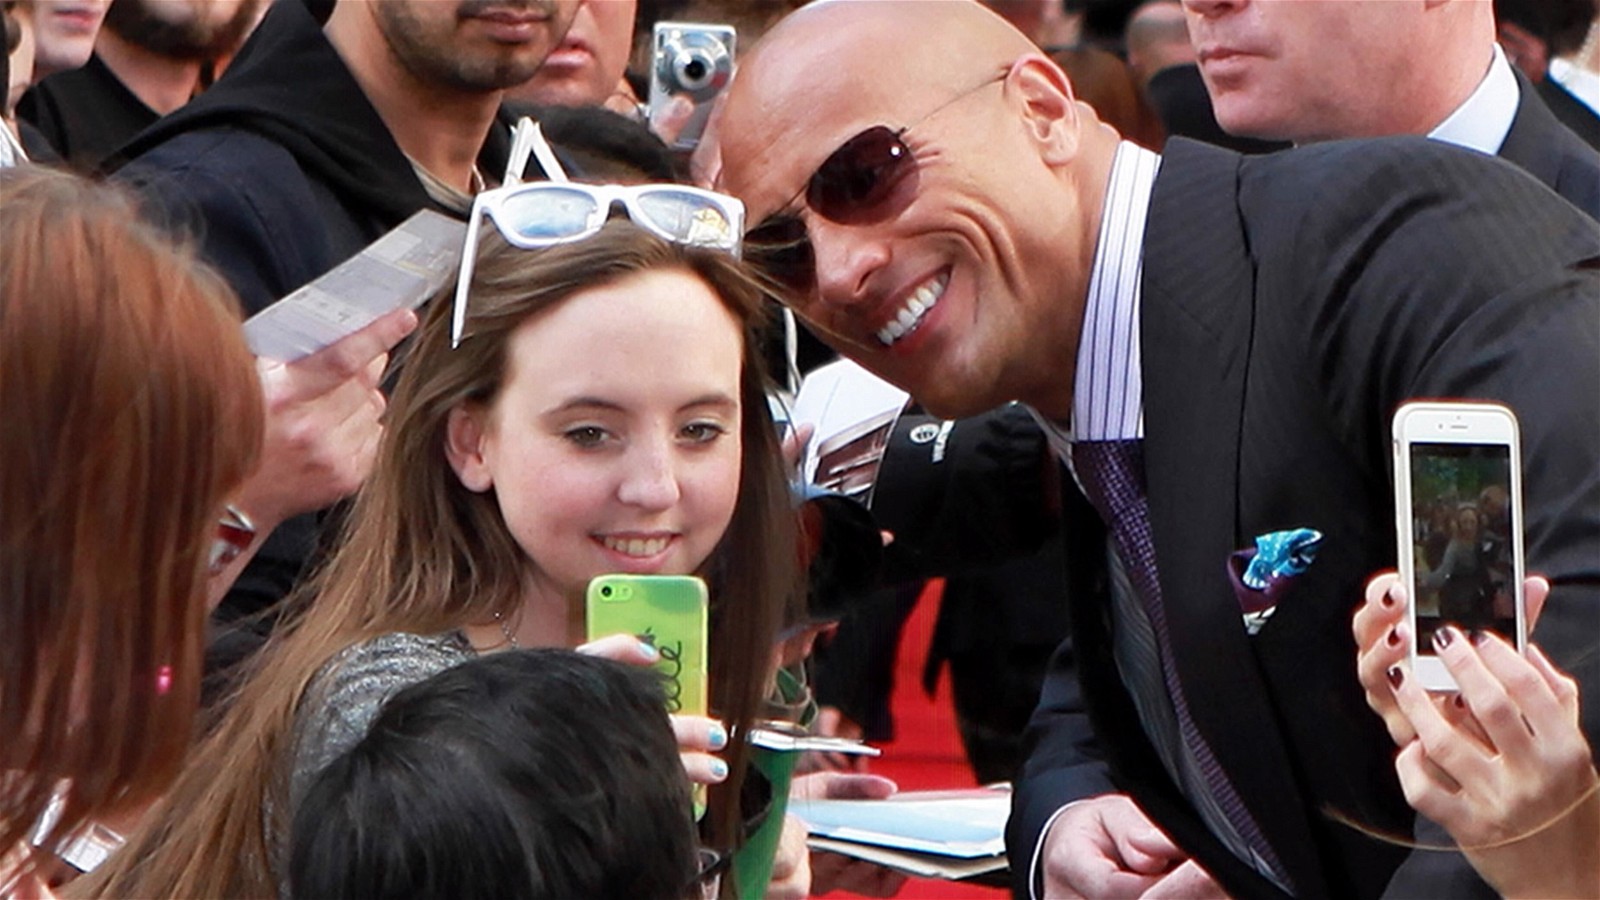 Dwayne Johnson taking selfies for a Guinness World Record